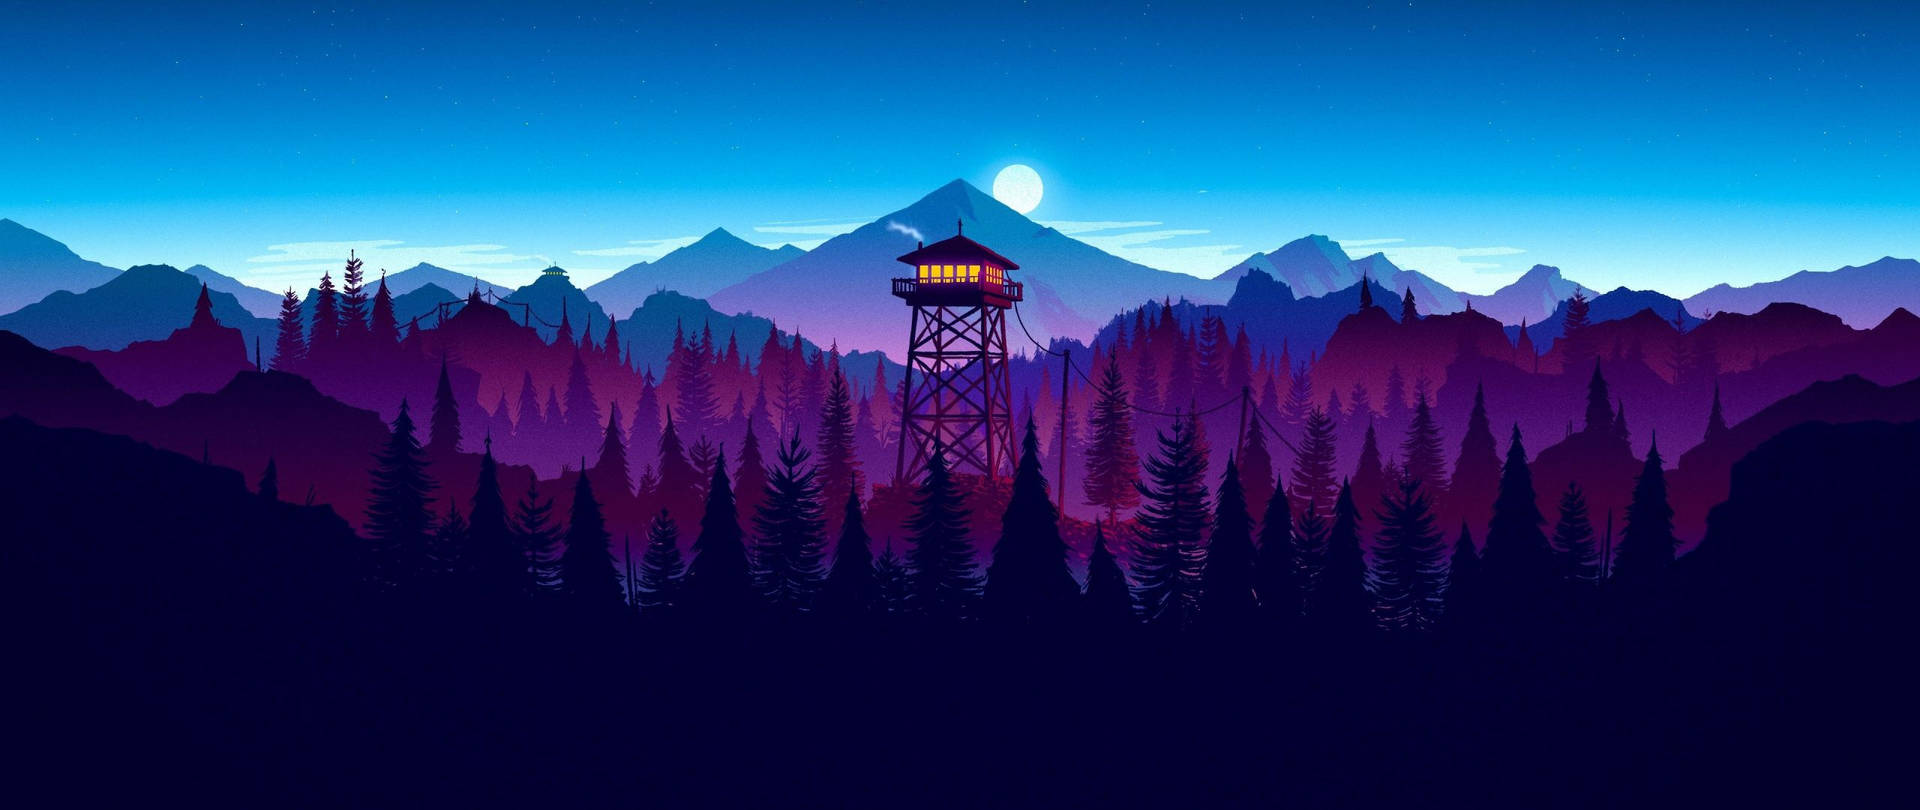 "Watching over a mysterious purple sky" Wallpaper